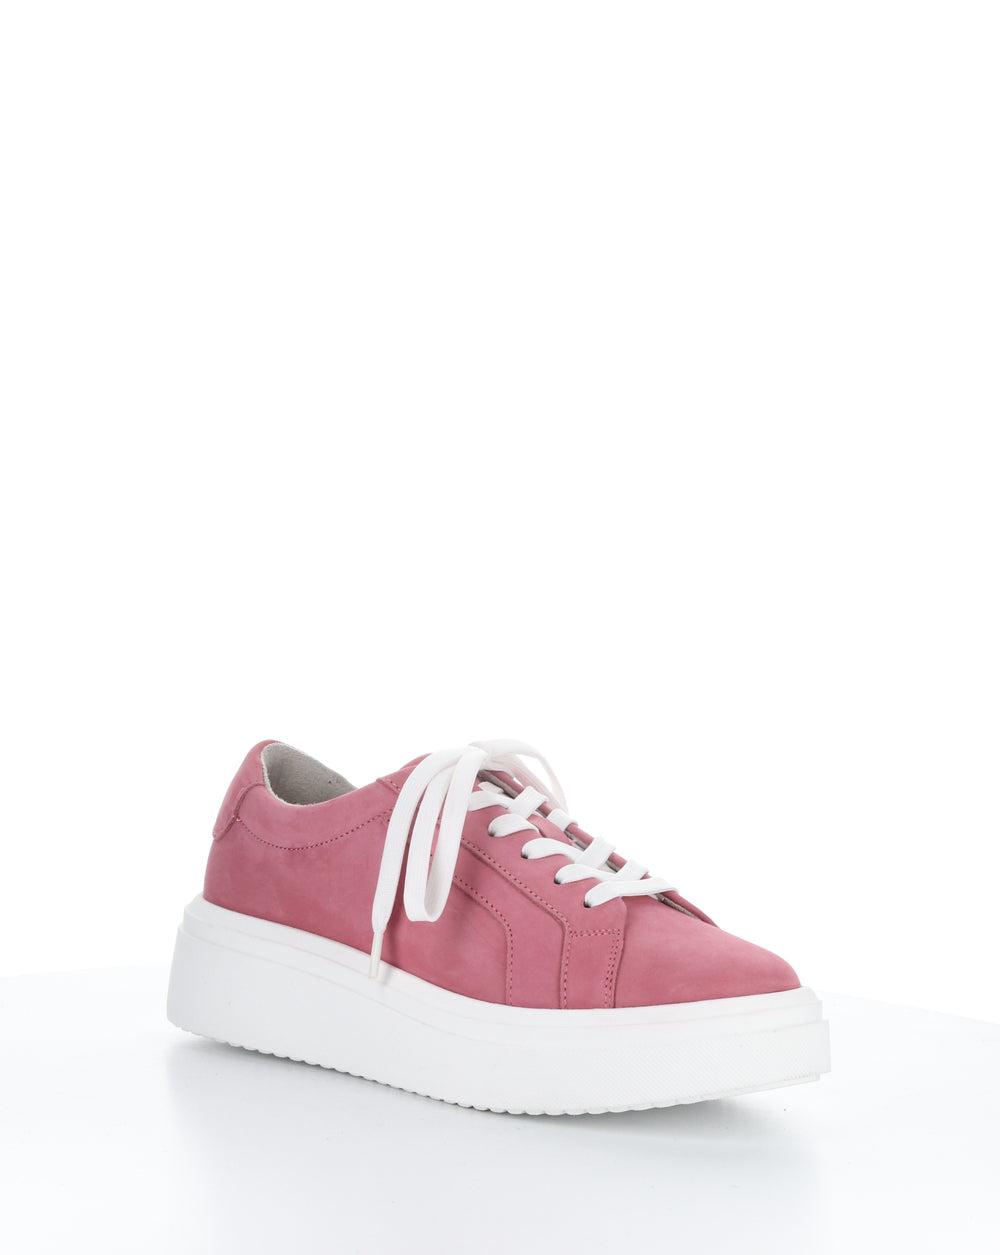 FLAVIA Rosey Lace-up Shoes